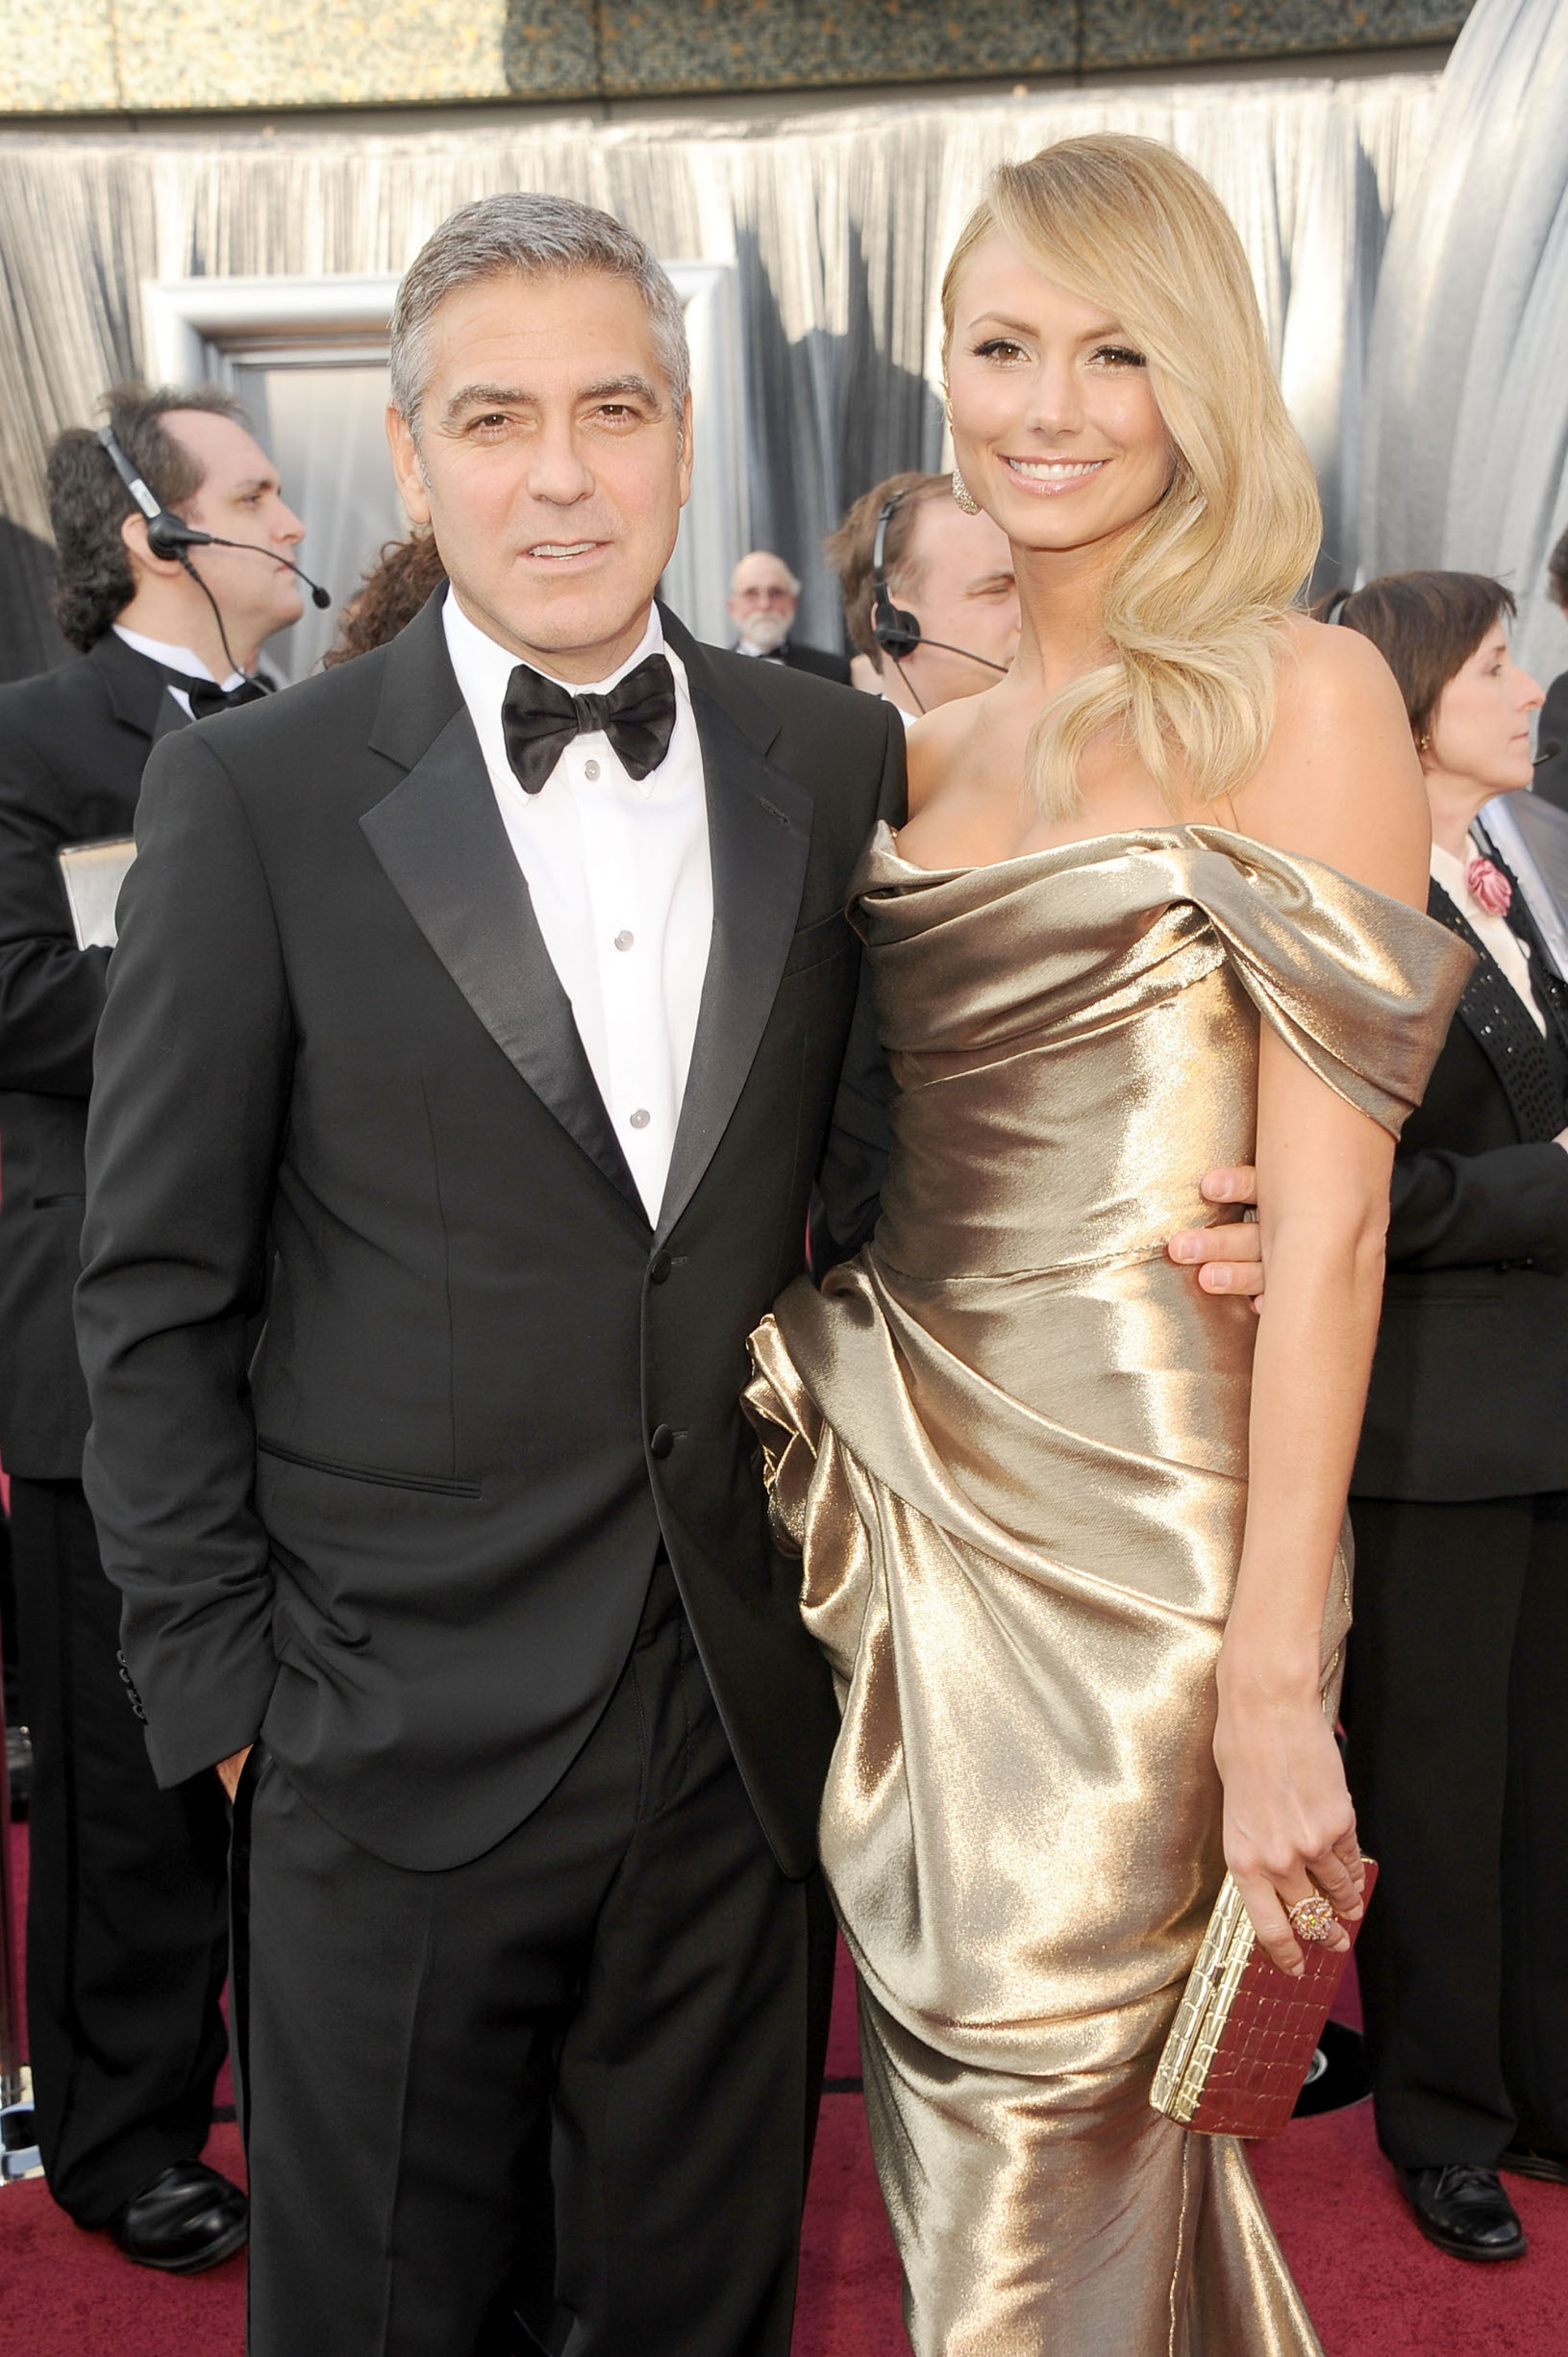 HOLLYWOOD, CA - FEBRUARY 26:  Actor George Clooney (L) and Stacy Keibler arrive at the 84th Annual Academy Awards held at the Hollywood & Highland Center on February 26, 2012 in Hollywood, California.  (Photo by Jason Merritt/Getty Images)